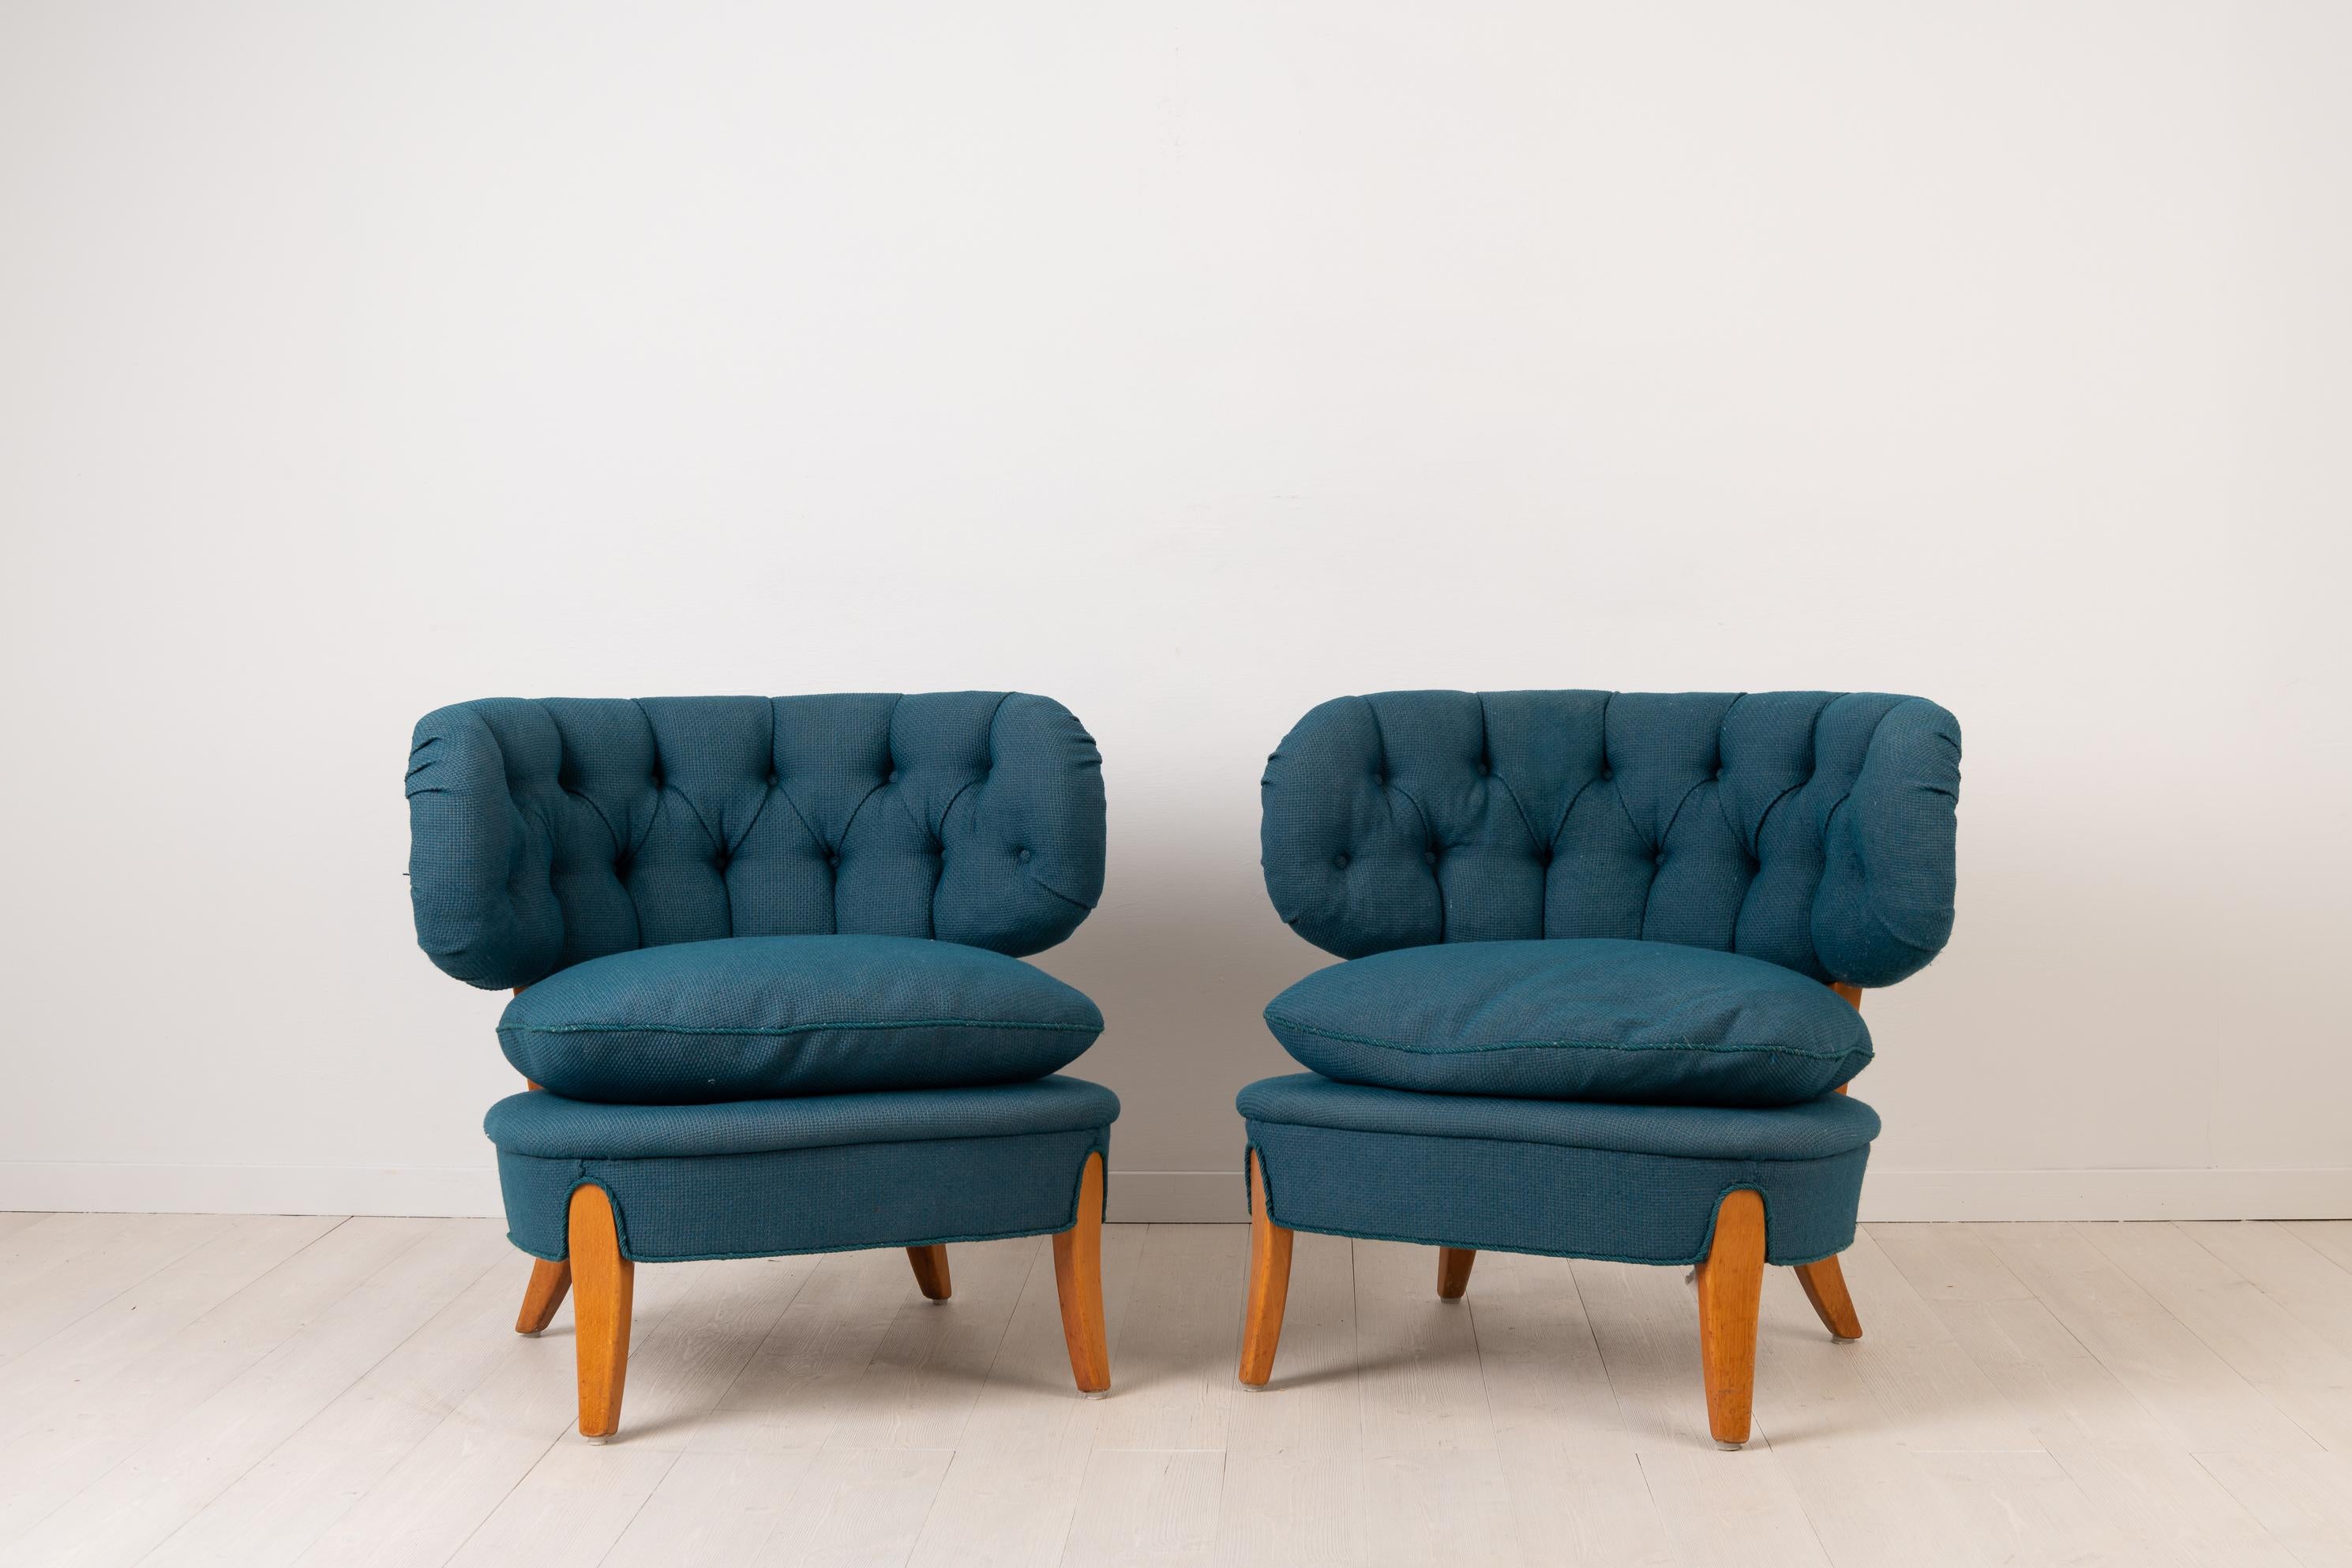 Pair of Otto Schulz lounge chairs, easy chairs Schulz 

These chairs are from the first part of the 20th century and the design by Schulz was completed in 1936. They were manufactured by Jio Möbler, a Swedish manufacturer still active today. With